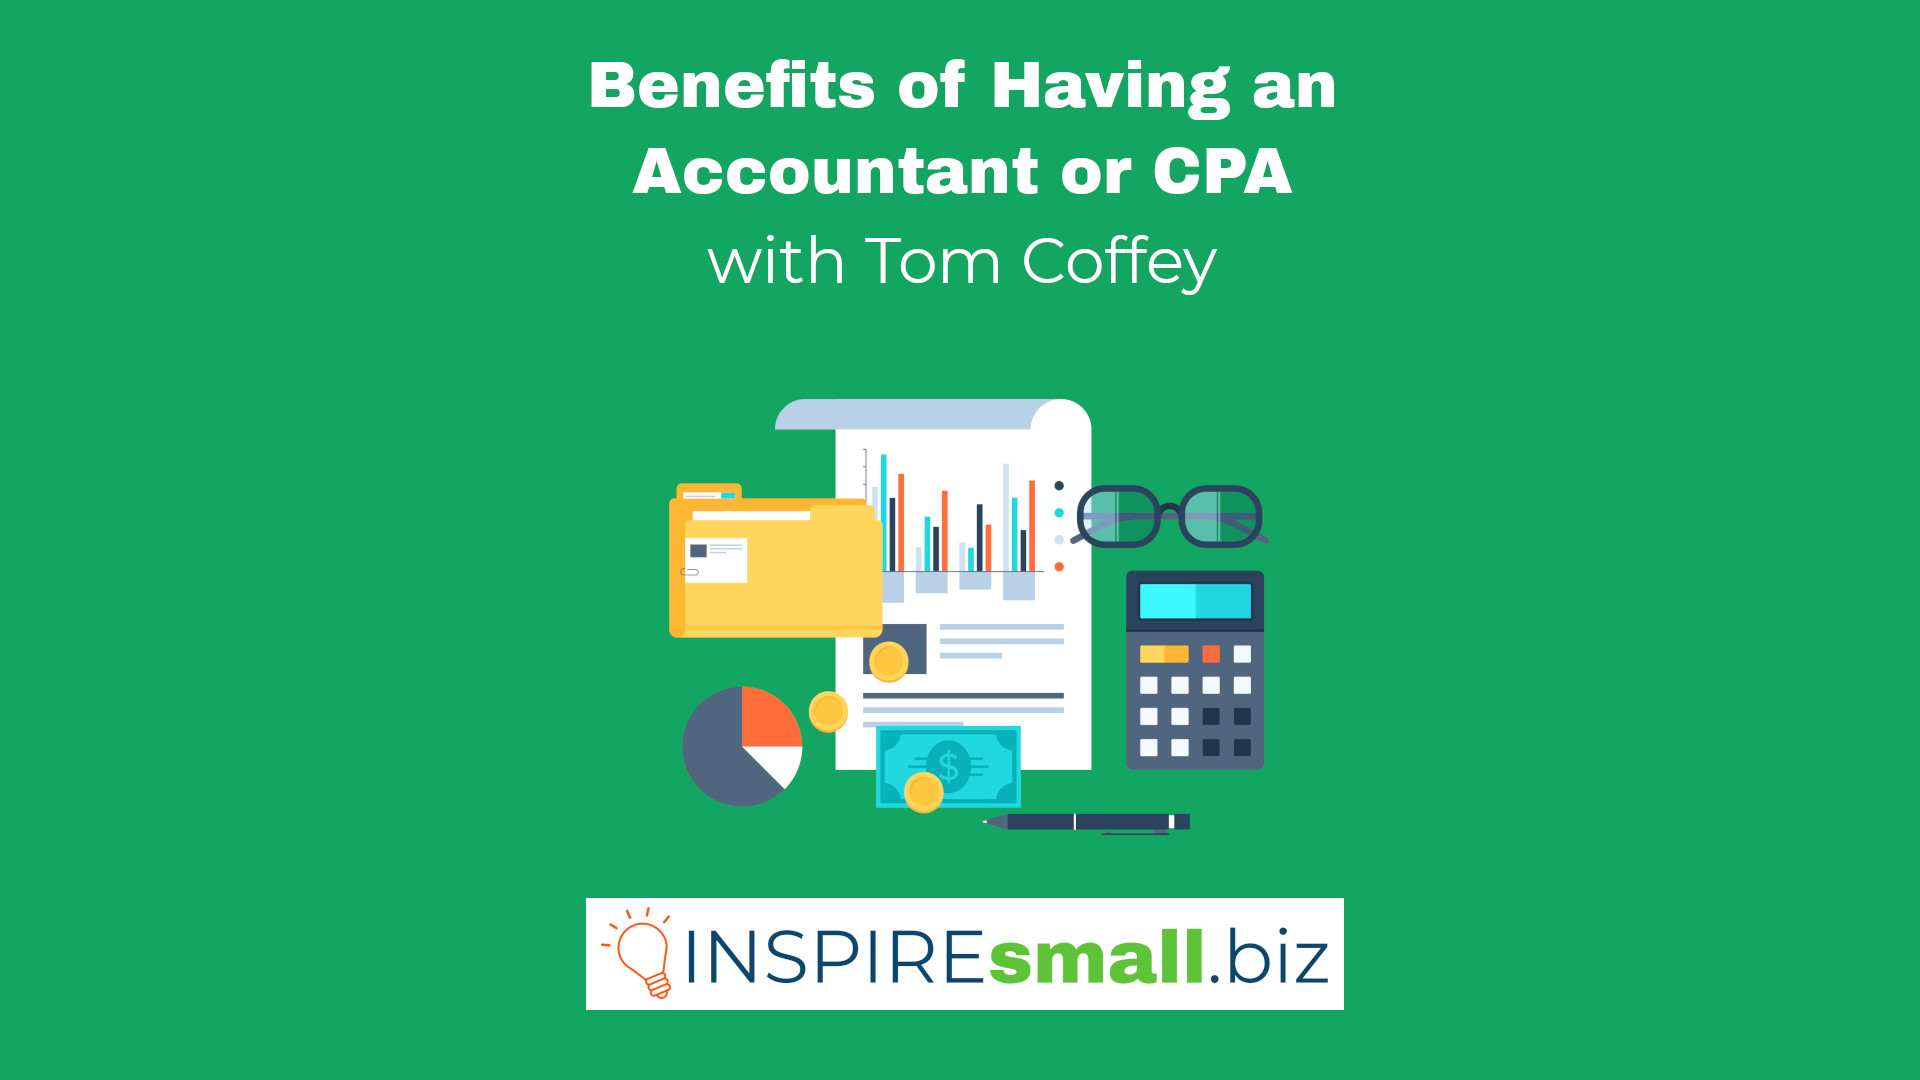 Benefits of Having an Accountant or CPA, with speaker Tom Coffey, hosted by INSPIREsmall.biz